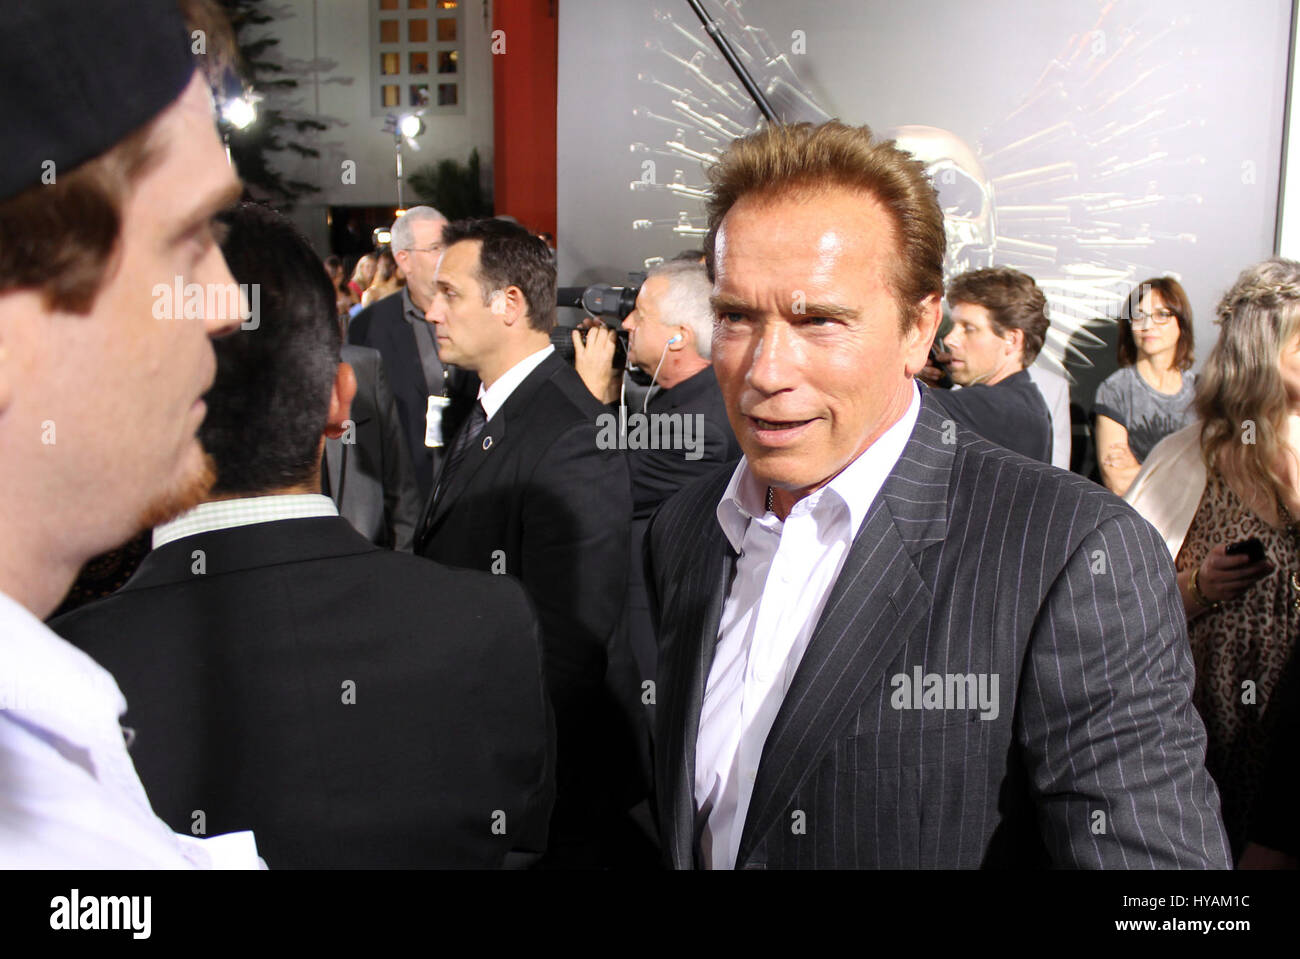 SACREMENTO, CALIFORNIA: Schwarzeneggar superfan Randy Jennings interviewing Arnie for Expendibles 2, 2012. THE WORLD’S number one Arnie superfan is celebrating his muscle-bound hero’s 67th birthday by revealing his Schwarzenegger shrine for the first time. From the carefully tending to his USD80K (£45K) collection of Arnold Schwarzenegger memorabilia to spending hours managing 90,000 new followers per month at his Arnie’s Army fansite – one superfan has made it his life’s mission to the Total Recall of his all-time idol. Since he was just eleven-years old and watched the legendary Arnie movie, Stock Photo